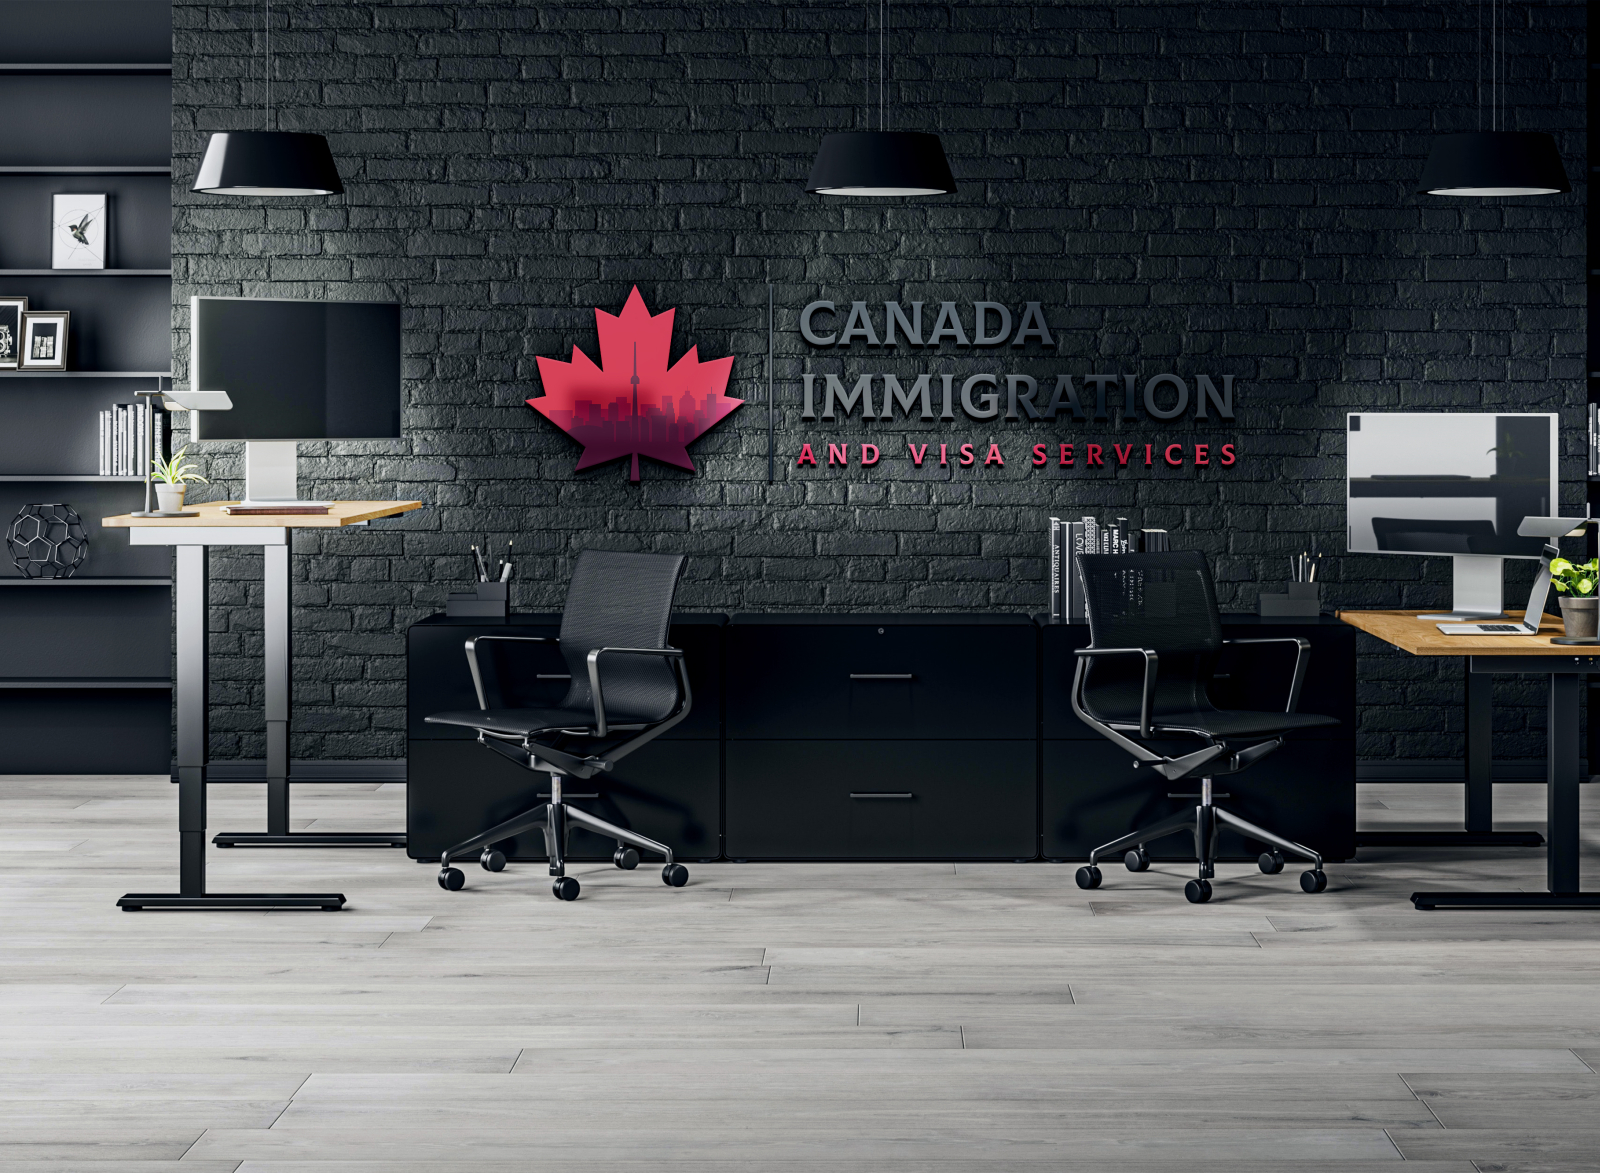 Pin by Er ਮਨ on Immigration office  Home decor decals Home decor Decor